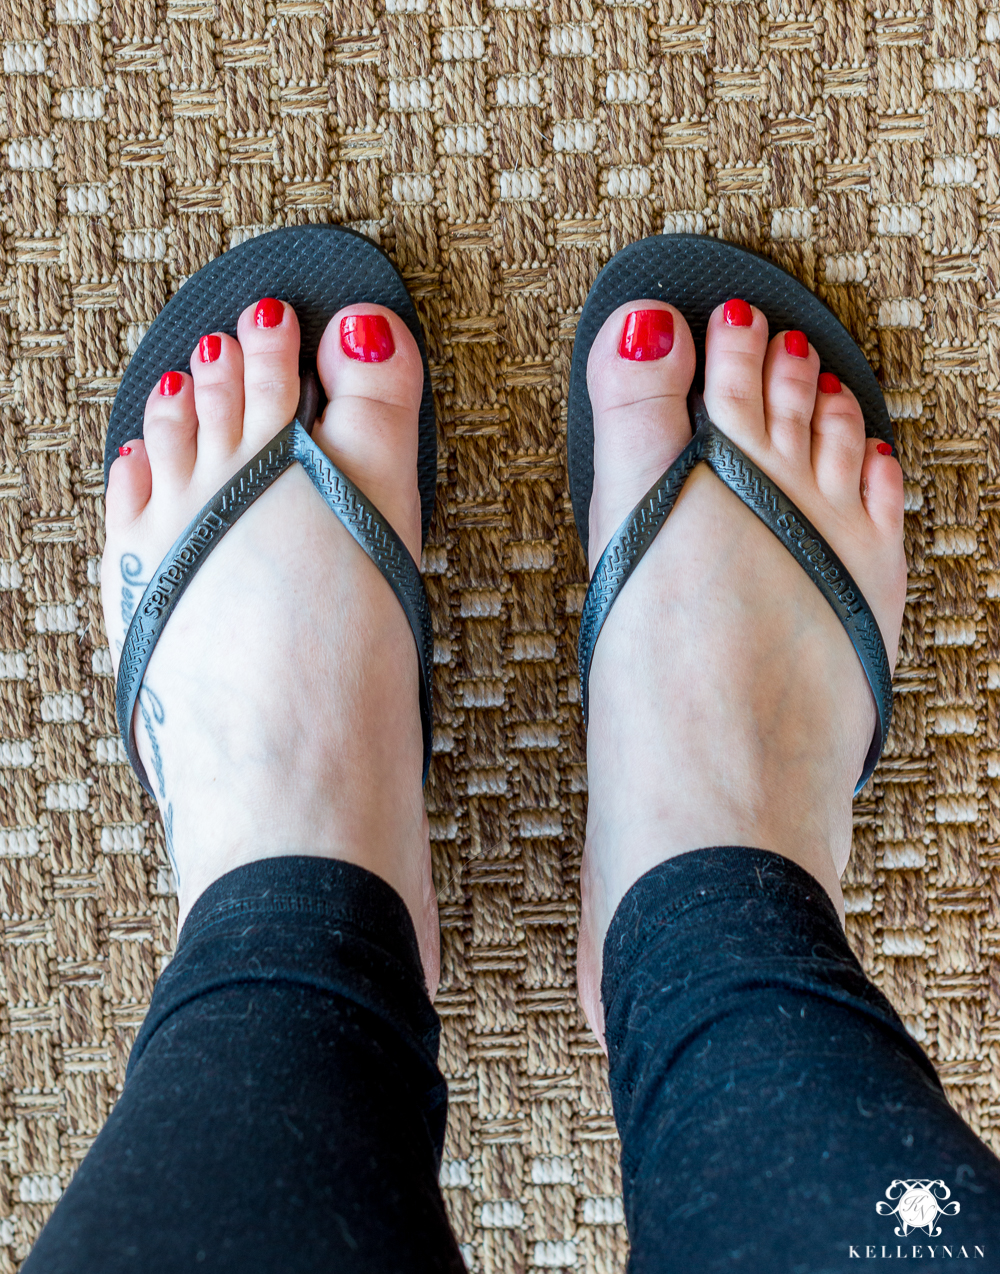 Havaiana Slim Flop Flop Review in Arch Support and Comfort